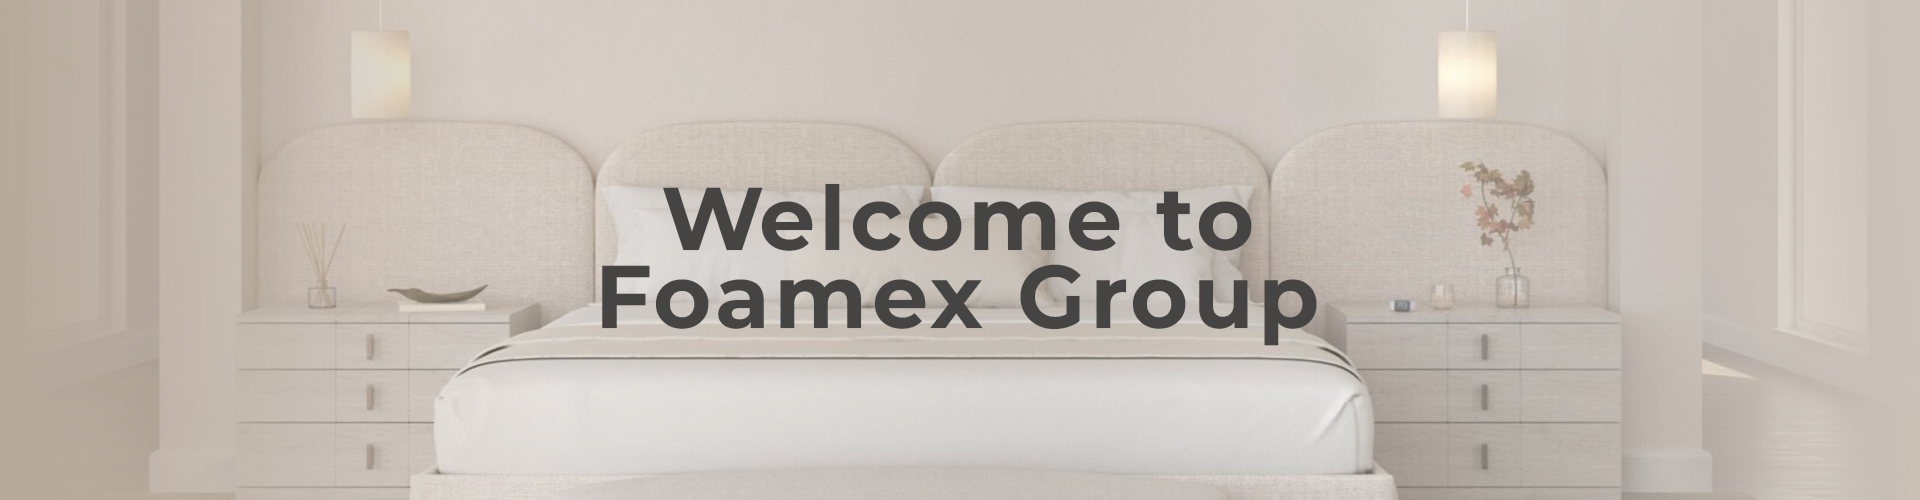 Welcome to Foamex Group